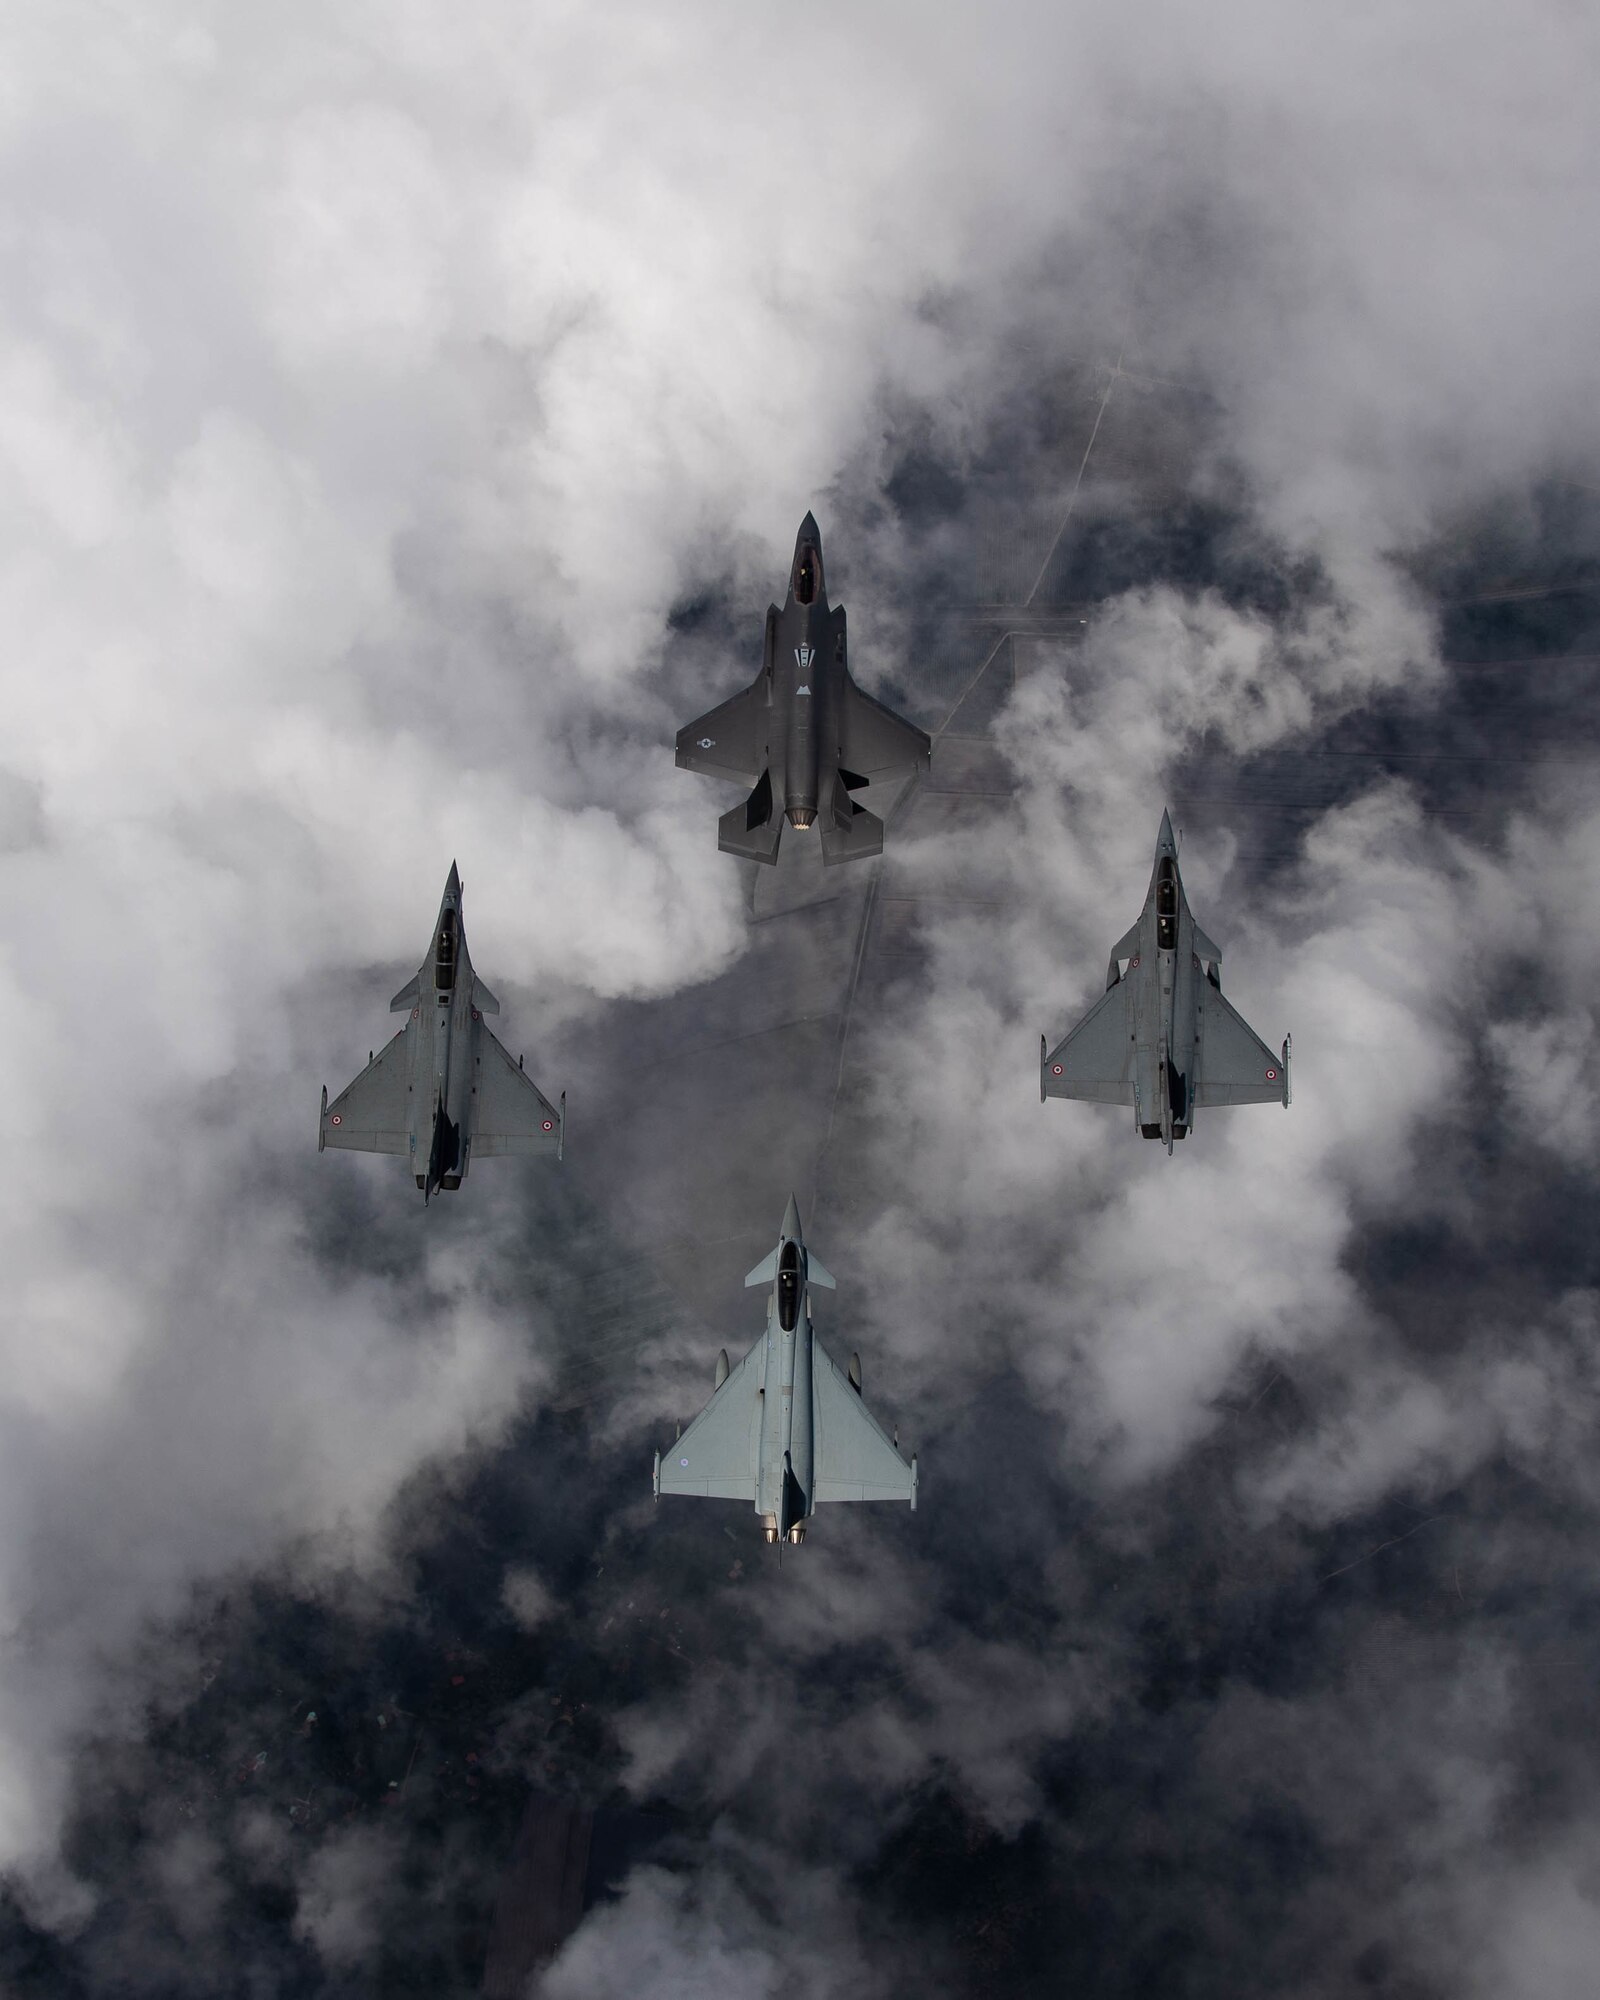 Four fighter aircraft flying in a diamond formation, looking at them from above